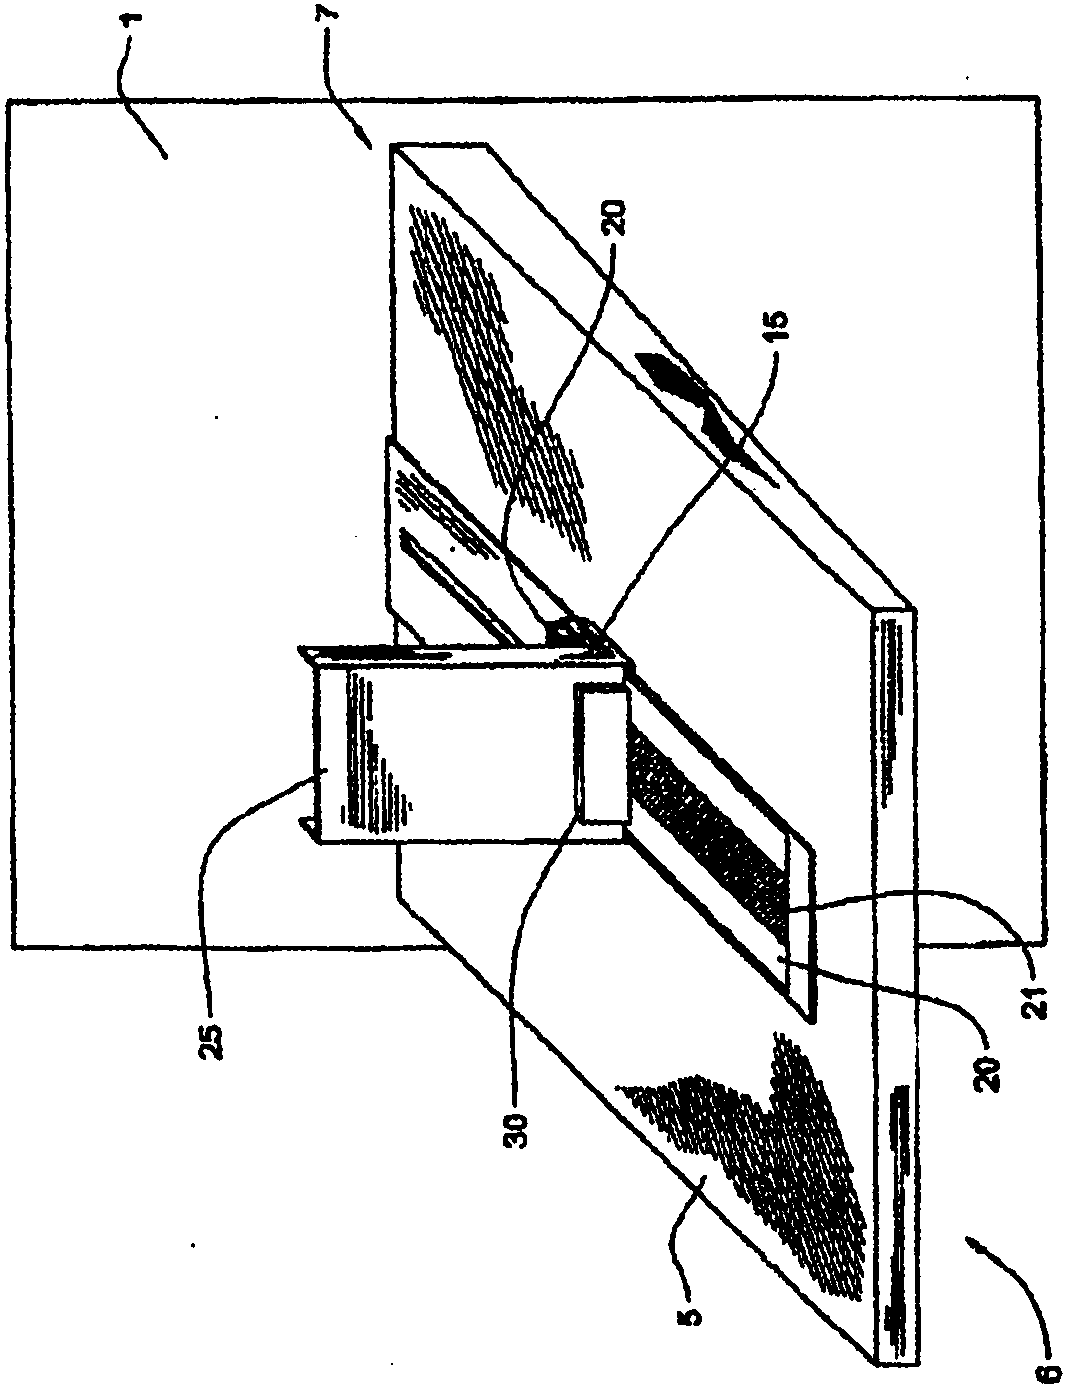 Systems and methods for merchandizing electronic displays